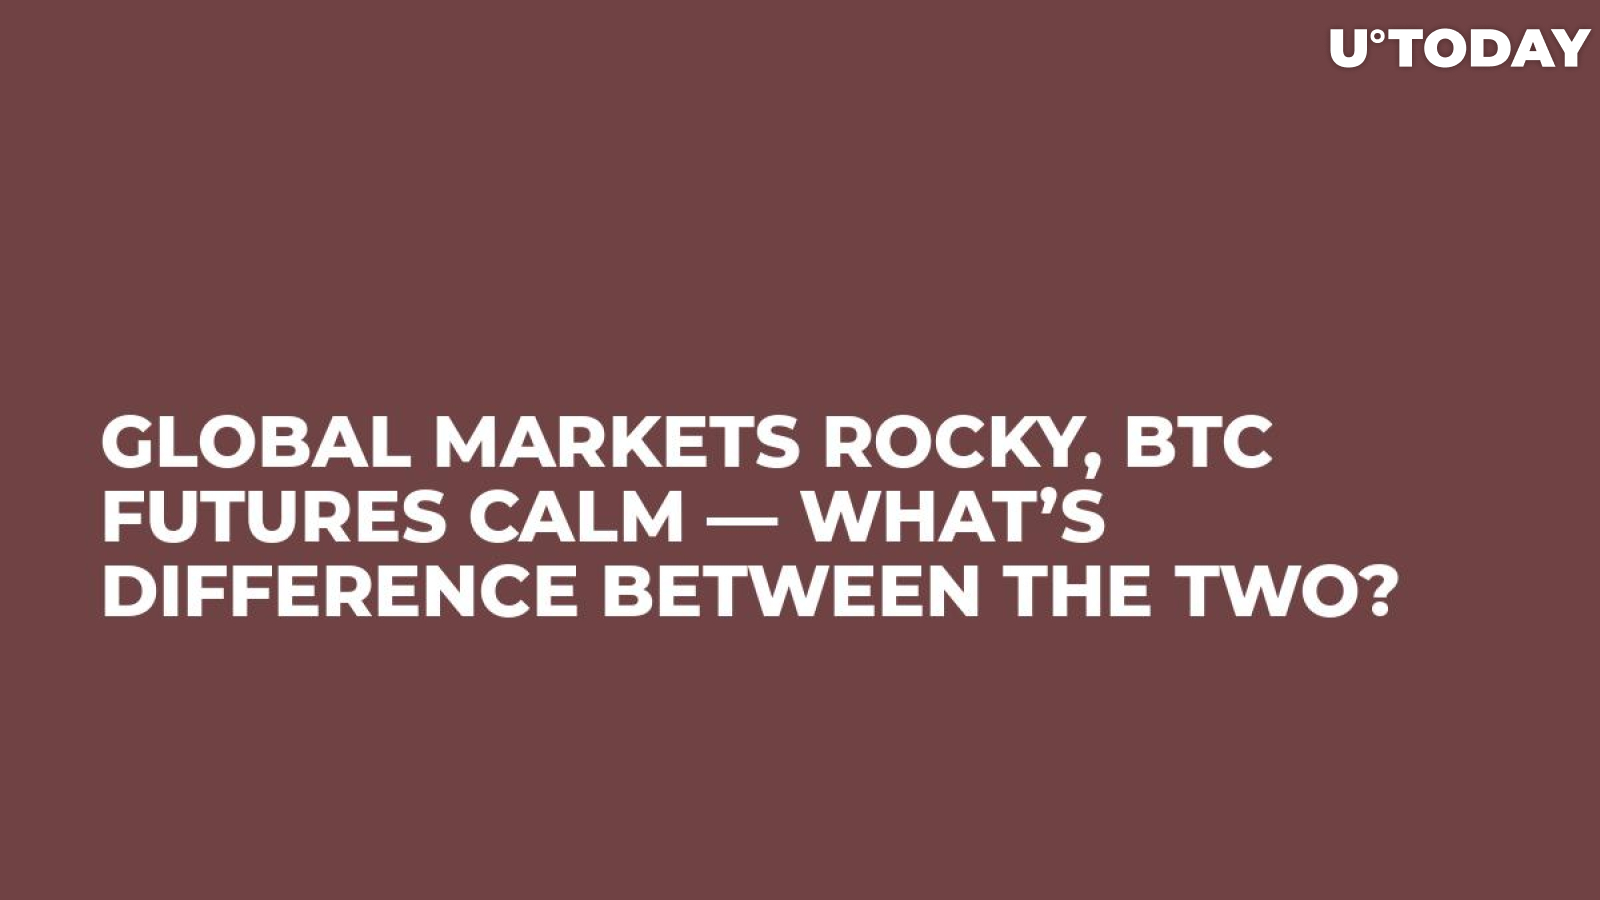 Global Markets Rocky, BTC Futures Calm — What’s Difference Between the Two?